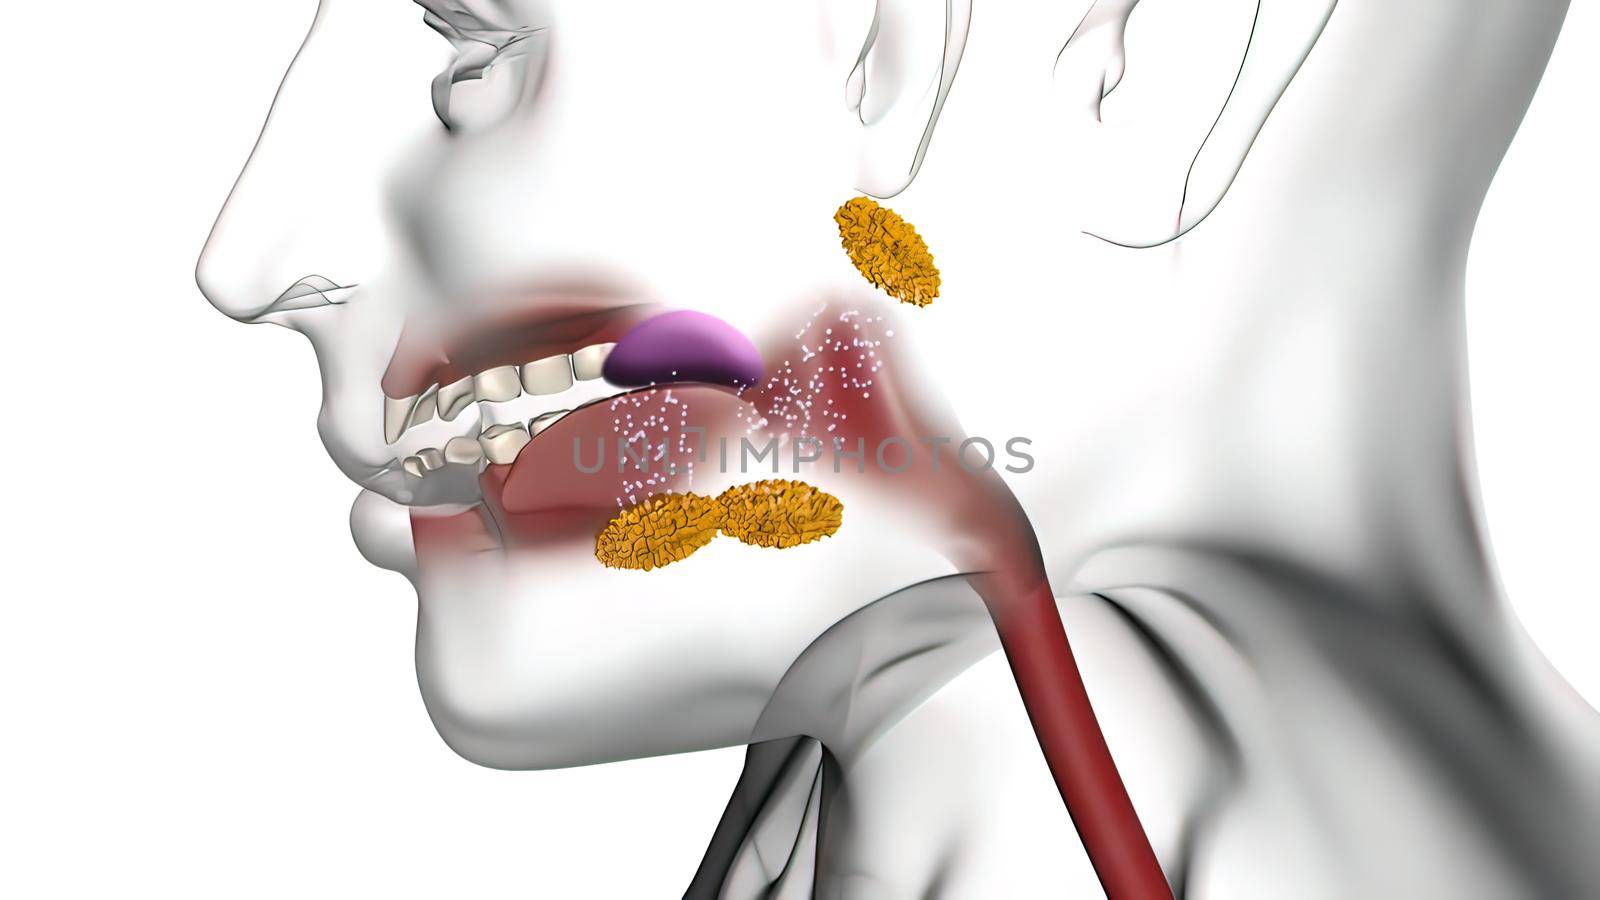 Enzymes in the mouth help break down food 3D illustration